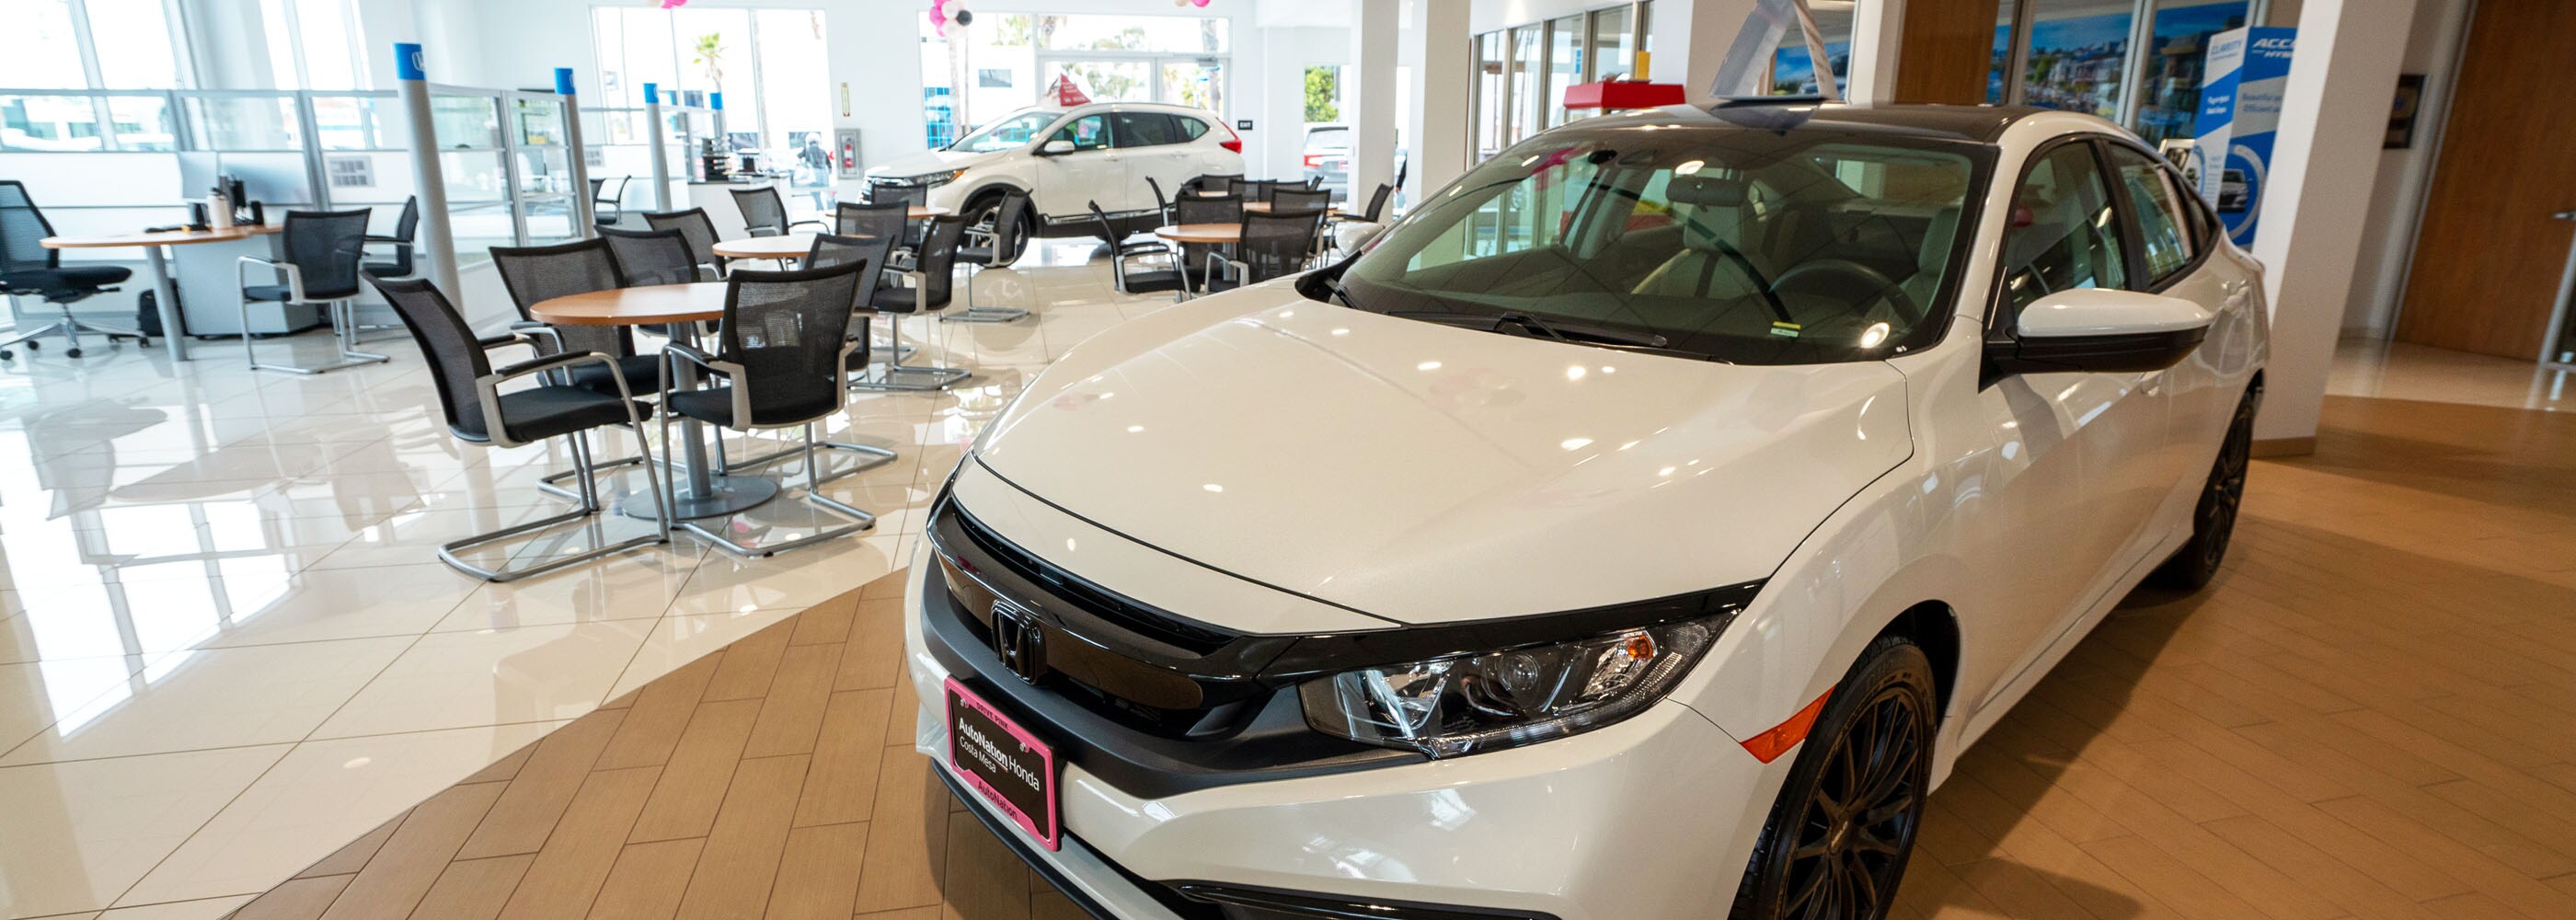 Interior view of AutoNation Honda Costa Mesa. A white Honda is parked with round tables and chairs nearby.